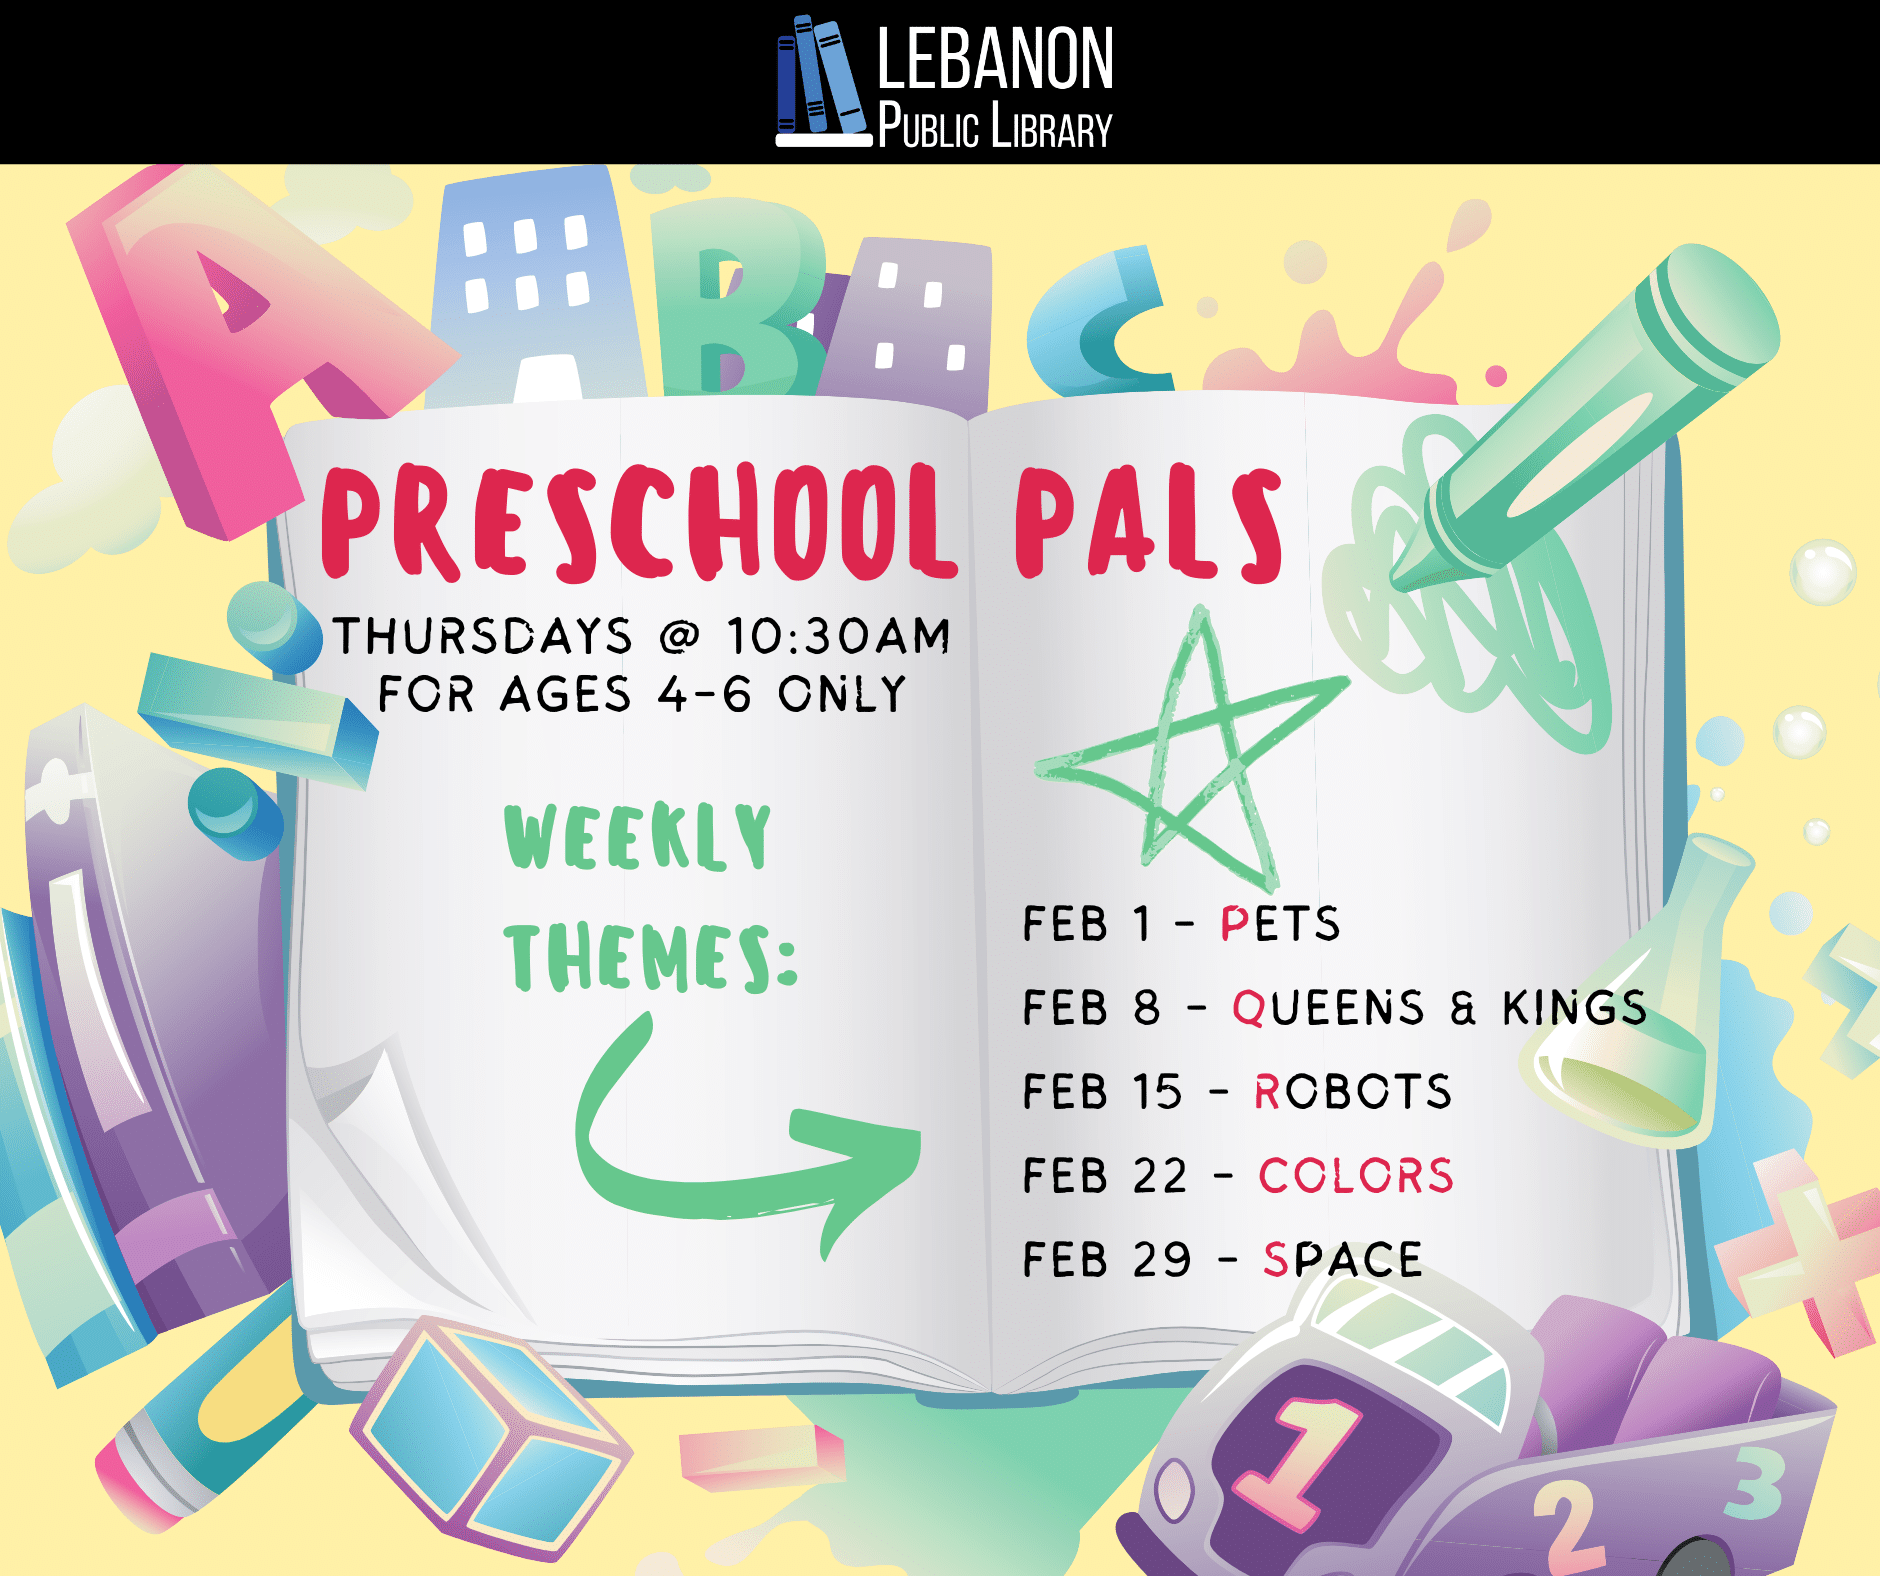 Preschool Pals, Thursdays at 10:30 a.m., for ages 4-6 only.